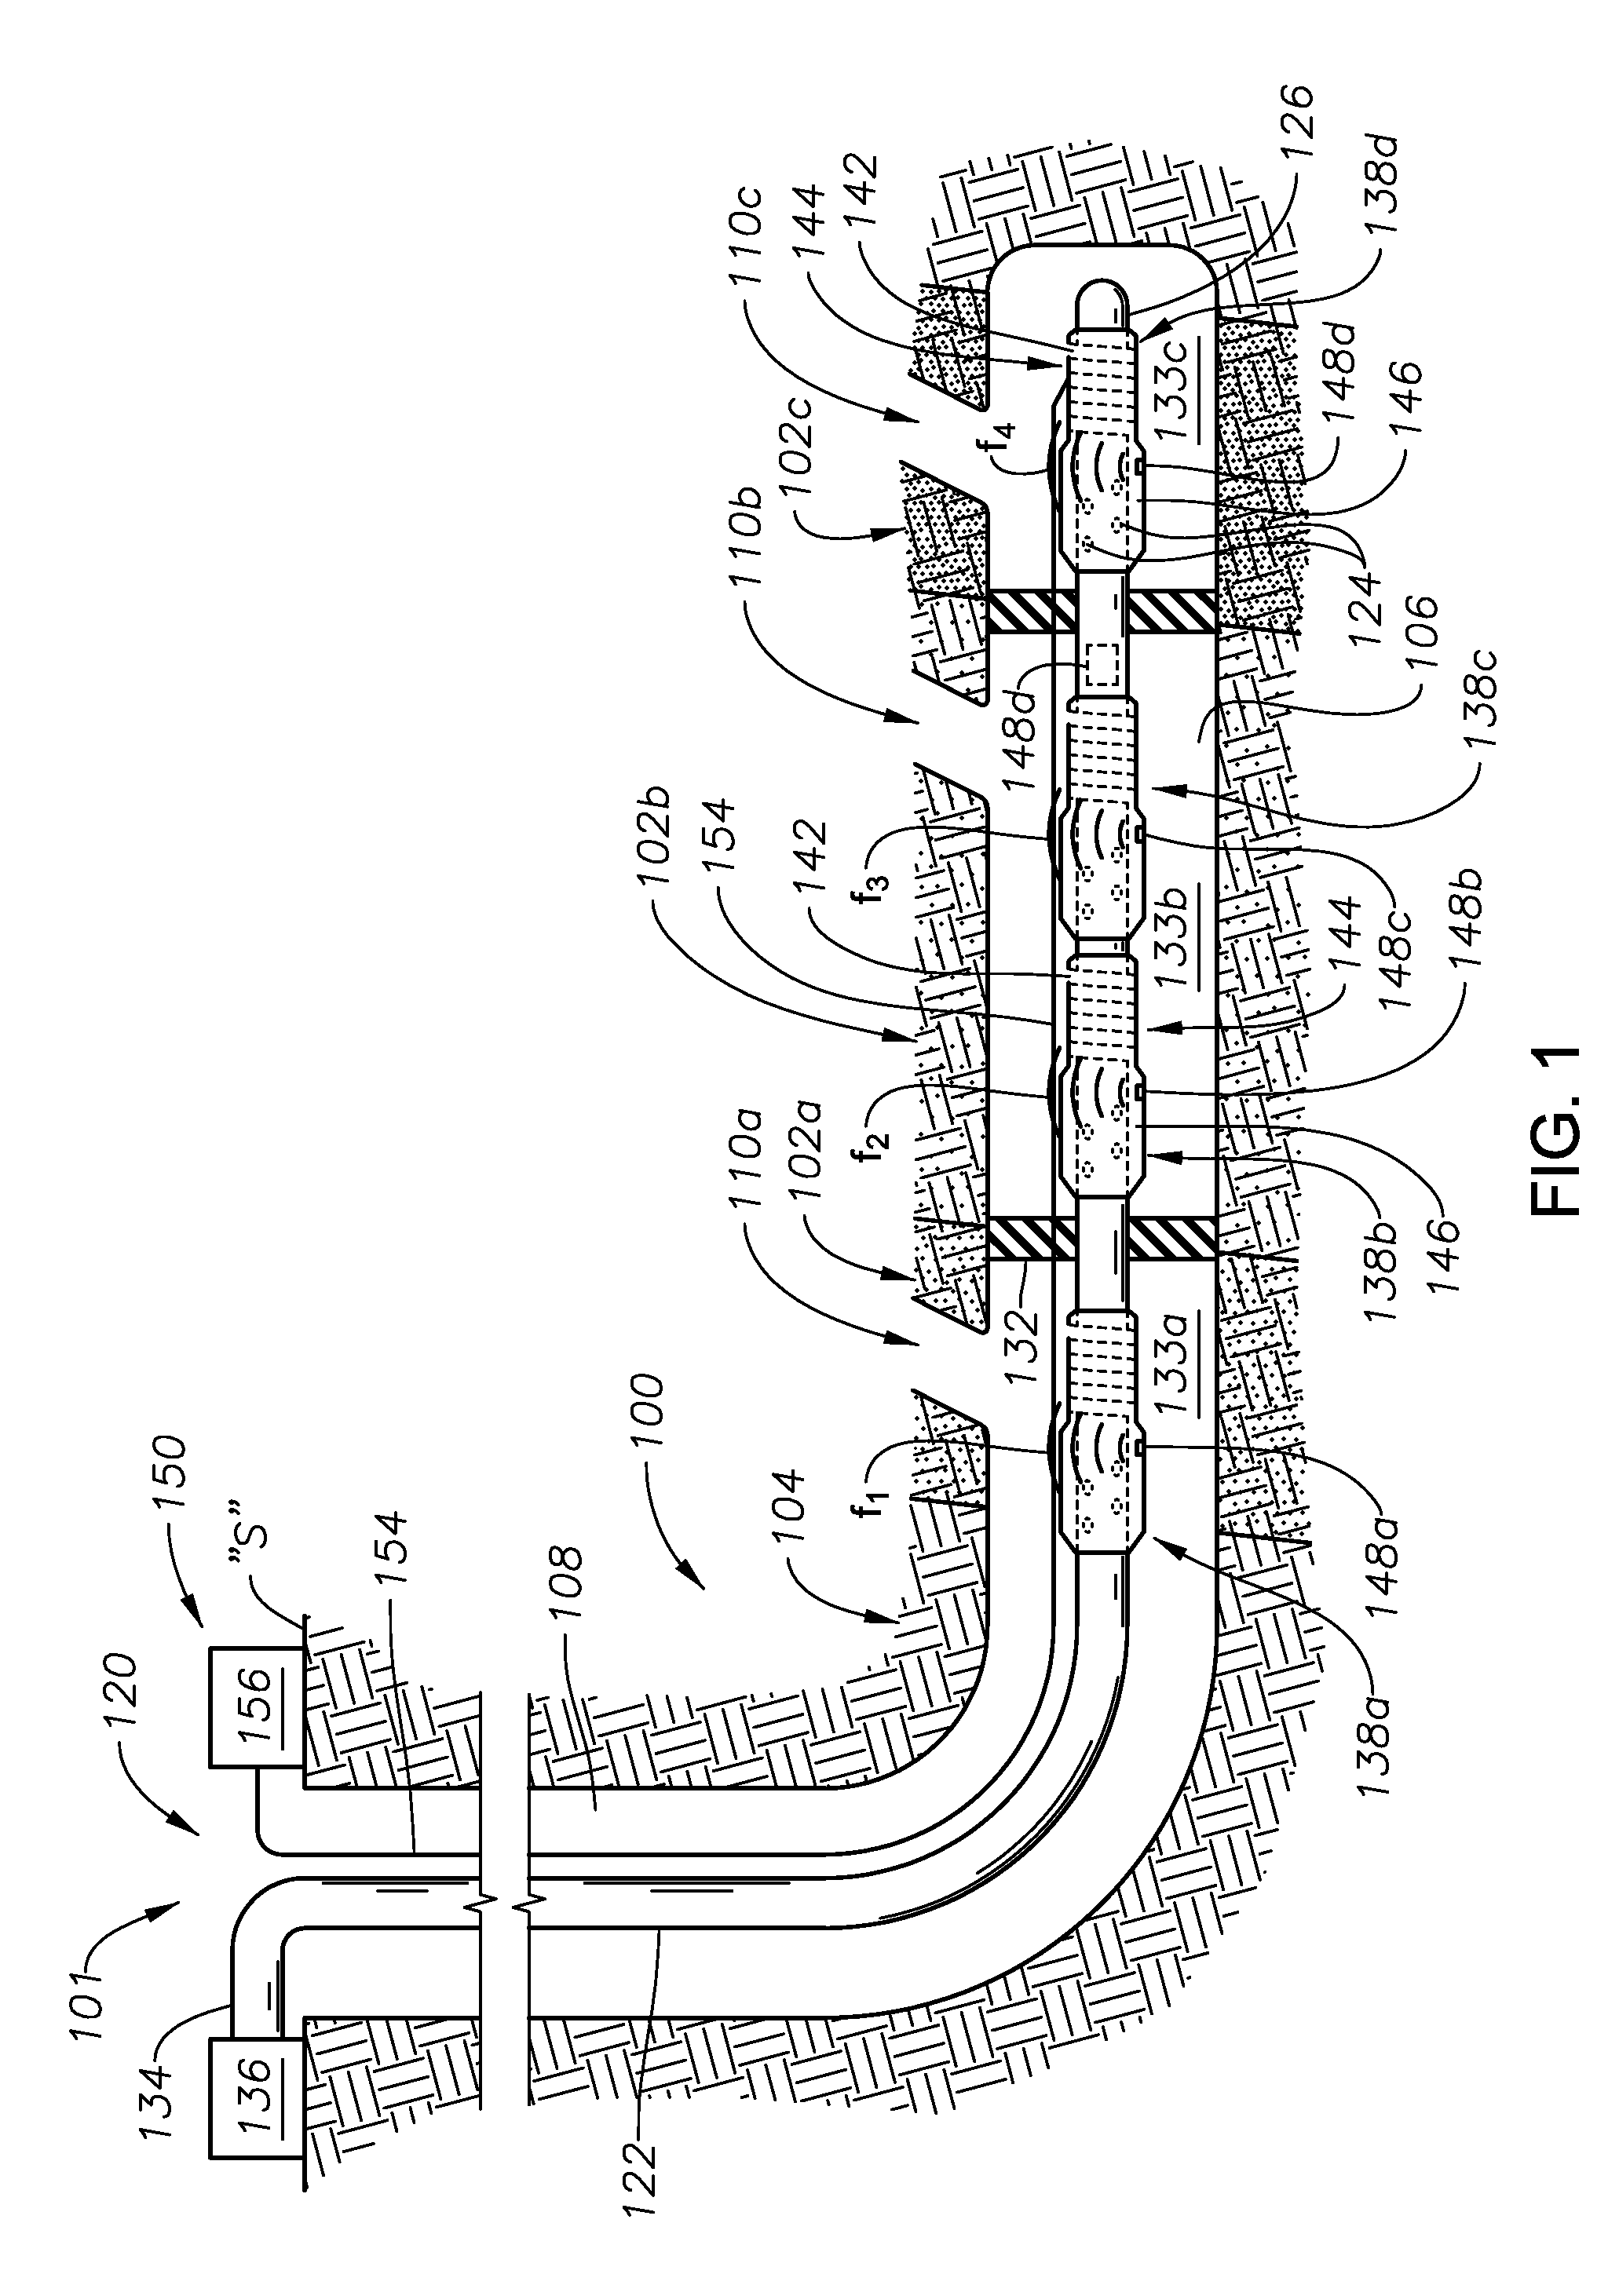 Inflow control valve and device producing distinct acoustic signal